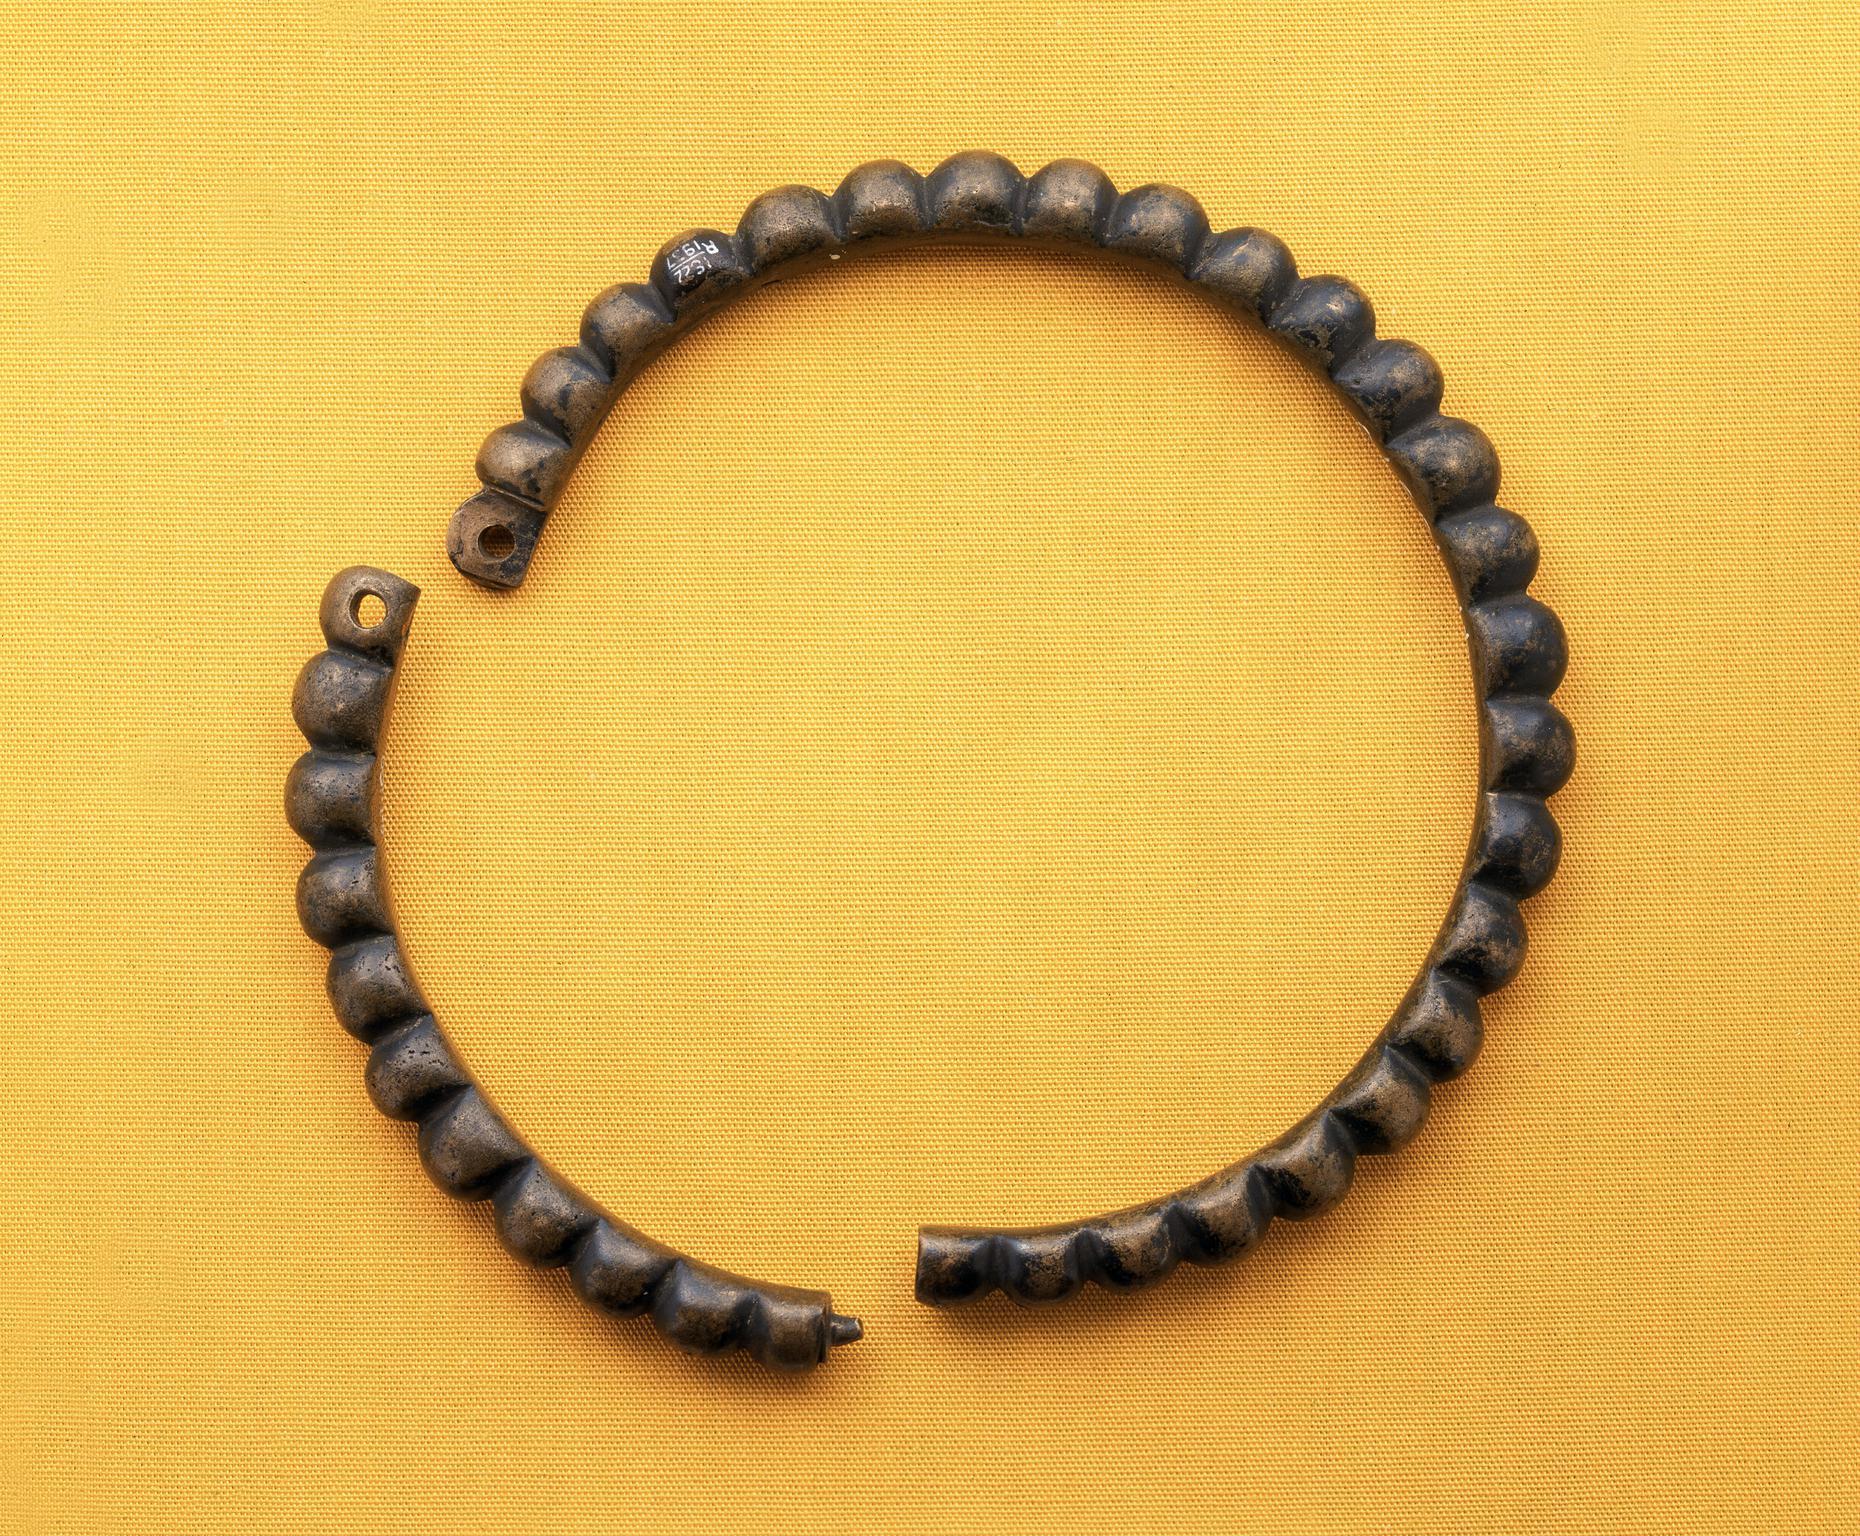 Early Iron Age bronze torc